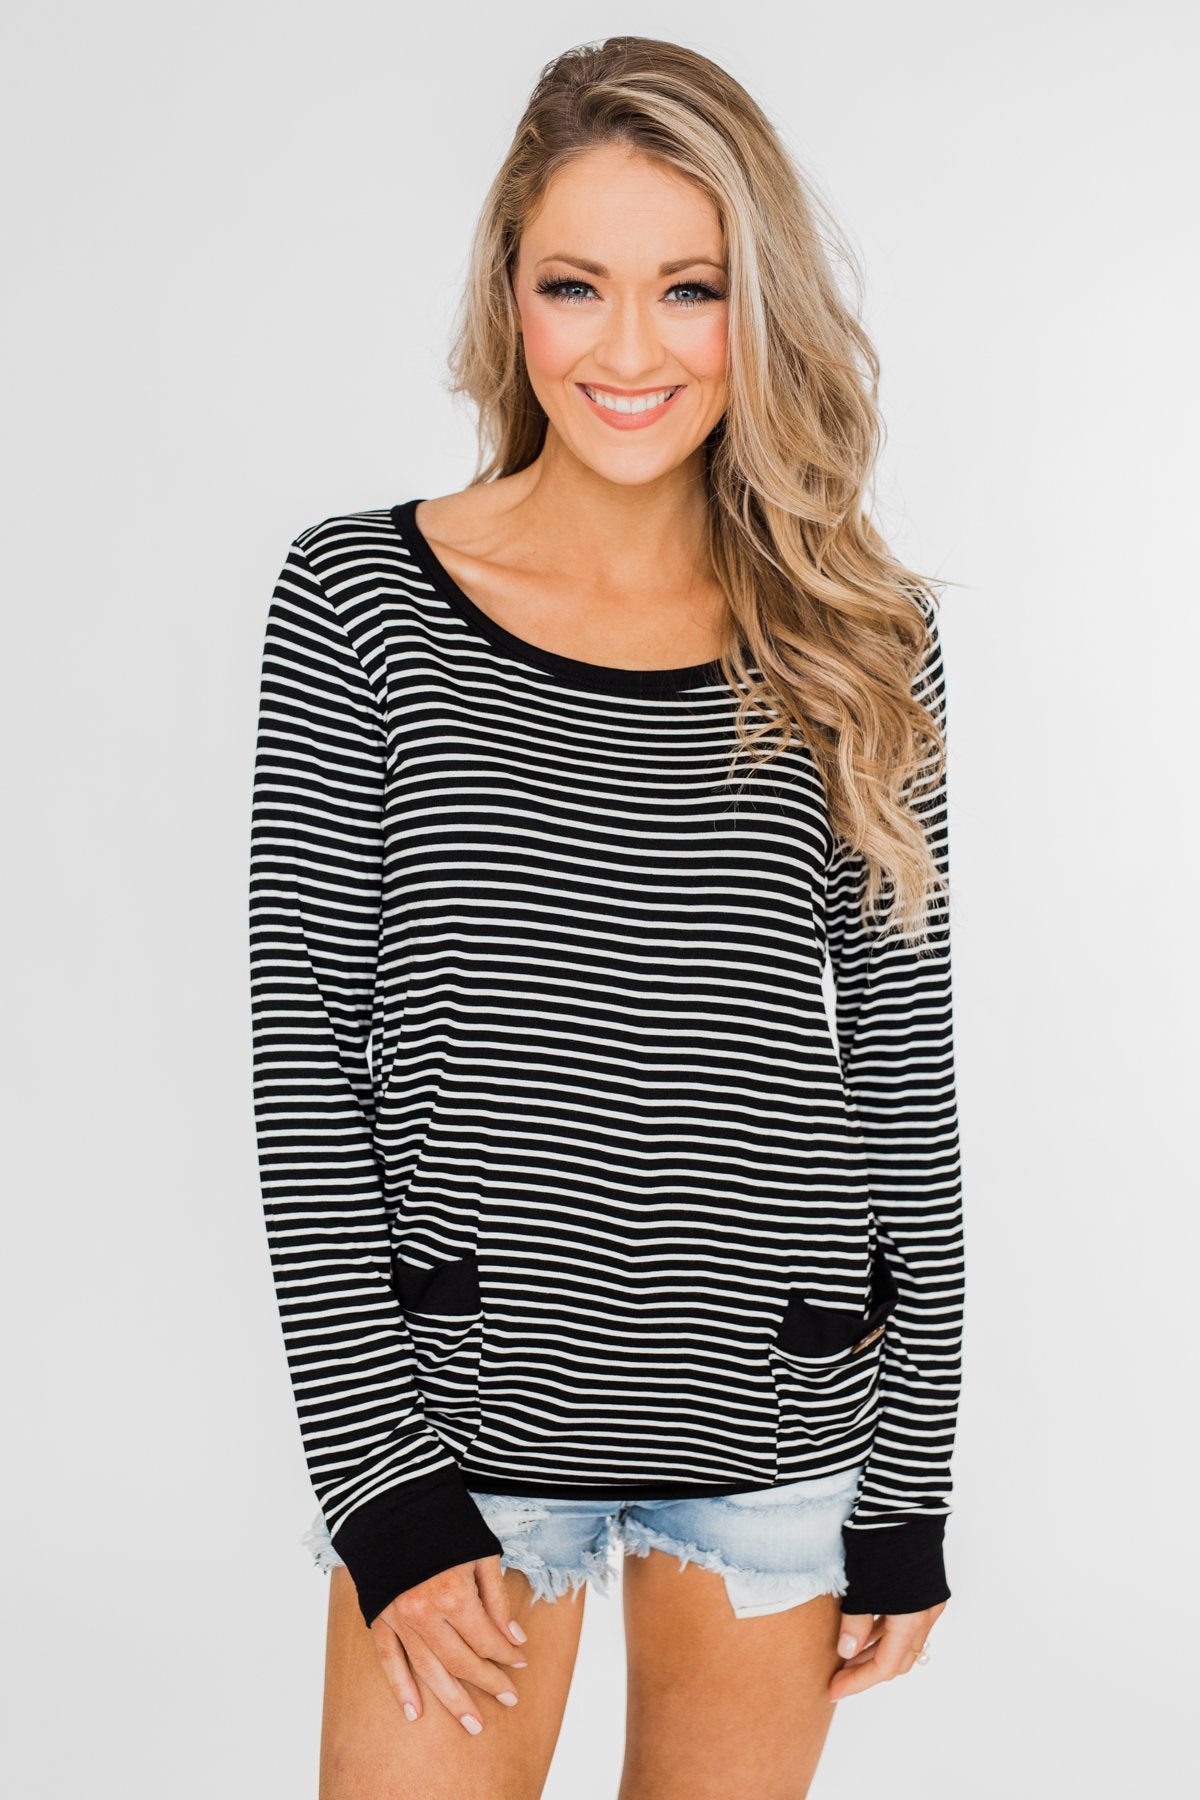 So Much In Common Striped Pocket Top- Black